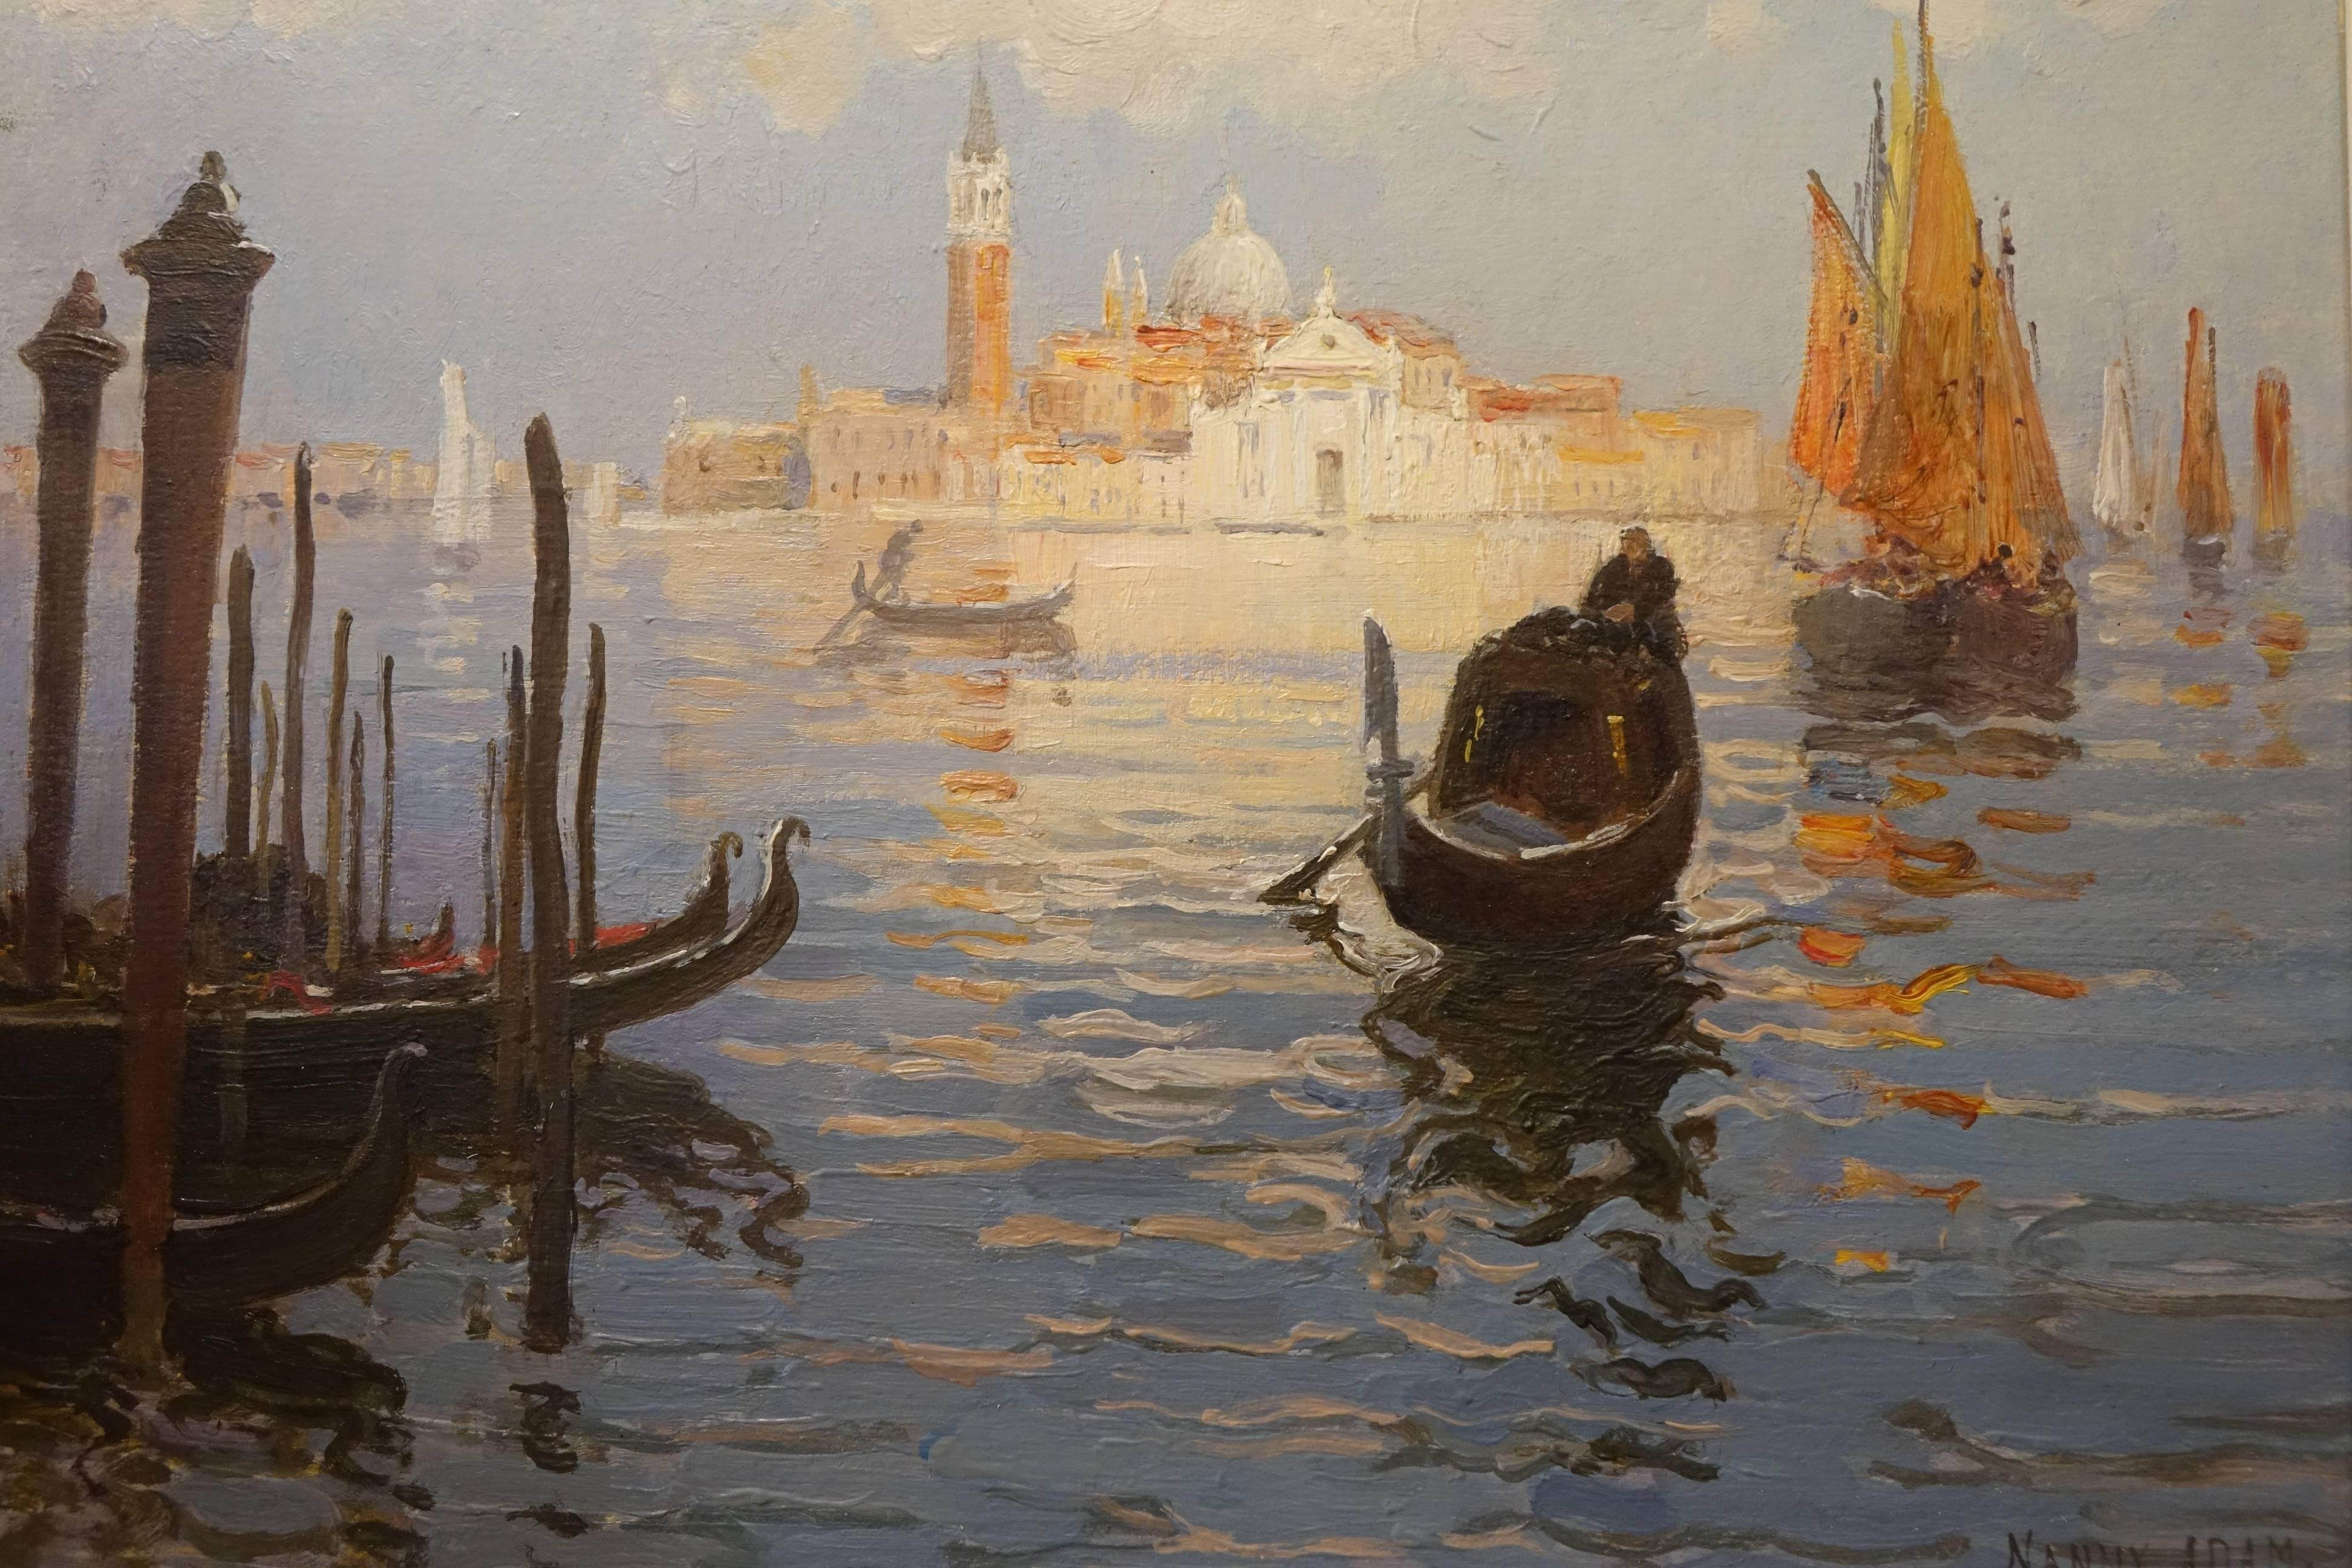 Oil on cardboard representing a view of San Giorgio Maggiore, seen from the Mole of Venice.
Signed lower right NANNY-ADAM
ADAM-LAURENS Suzanne, known as Nanny, 1861-1915.
A student of Jules Laurens, she exhibited regularly at the Salon des Femmes